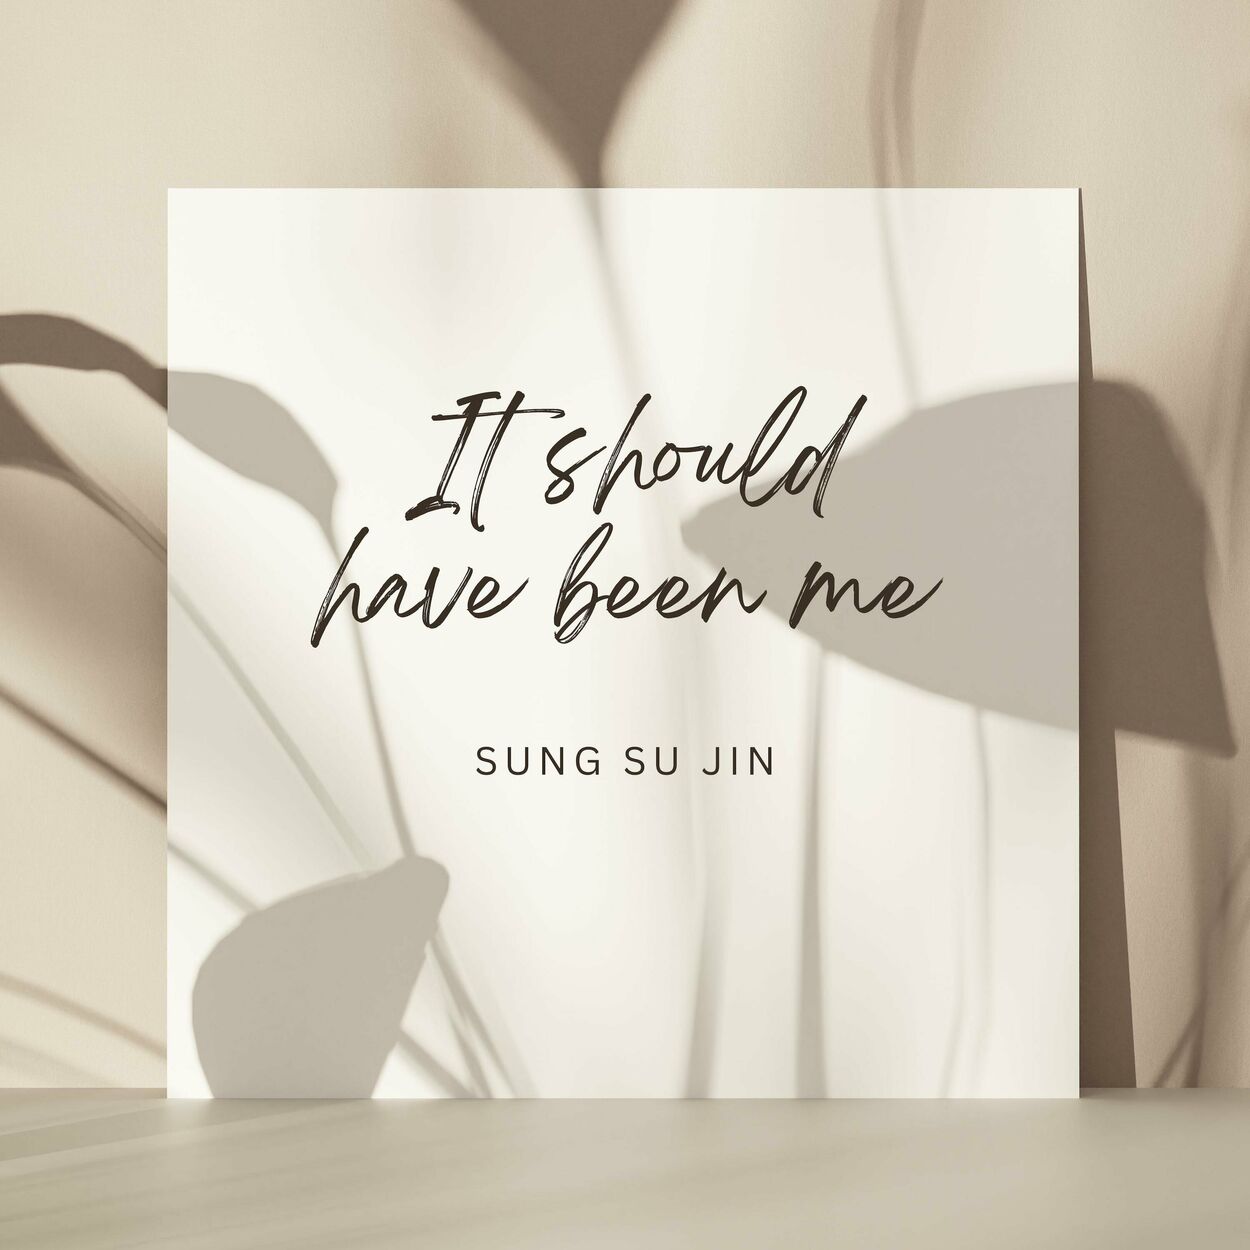 Sung Su Jin – It should have been me – Single